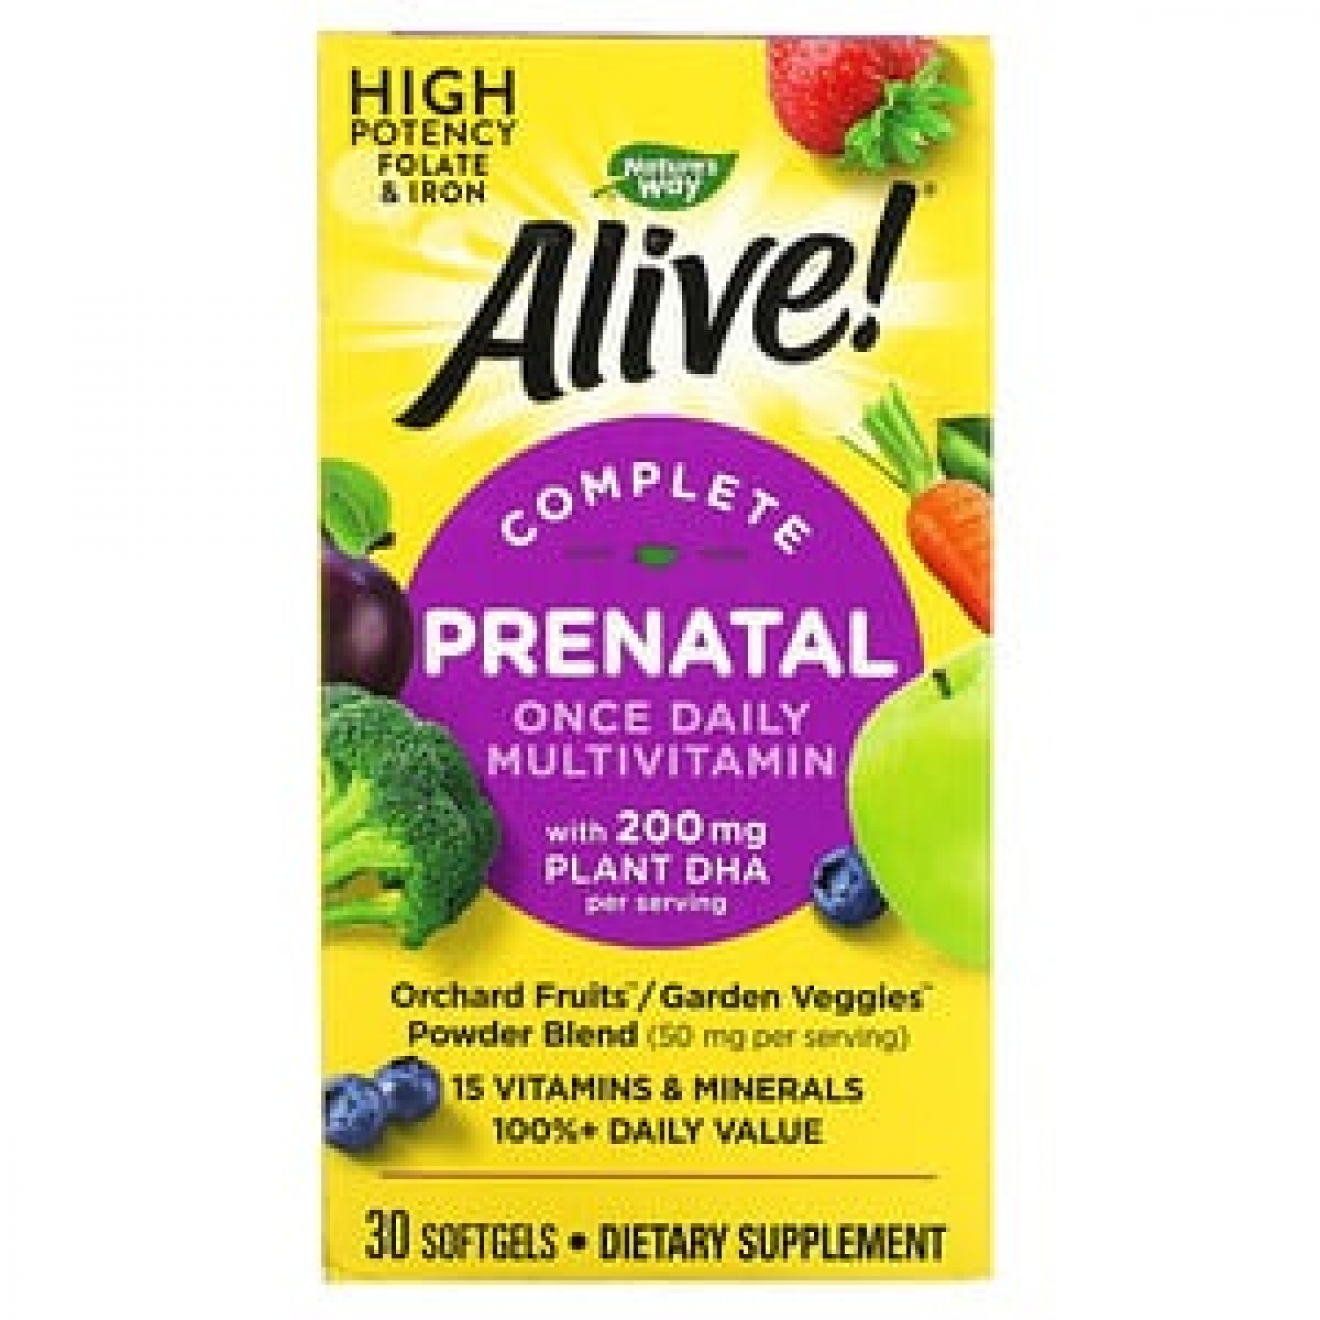 Natures Way, Alive! Complete Prenatal Once Daily Multivitamin, 30 Softgels